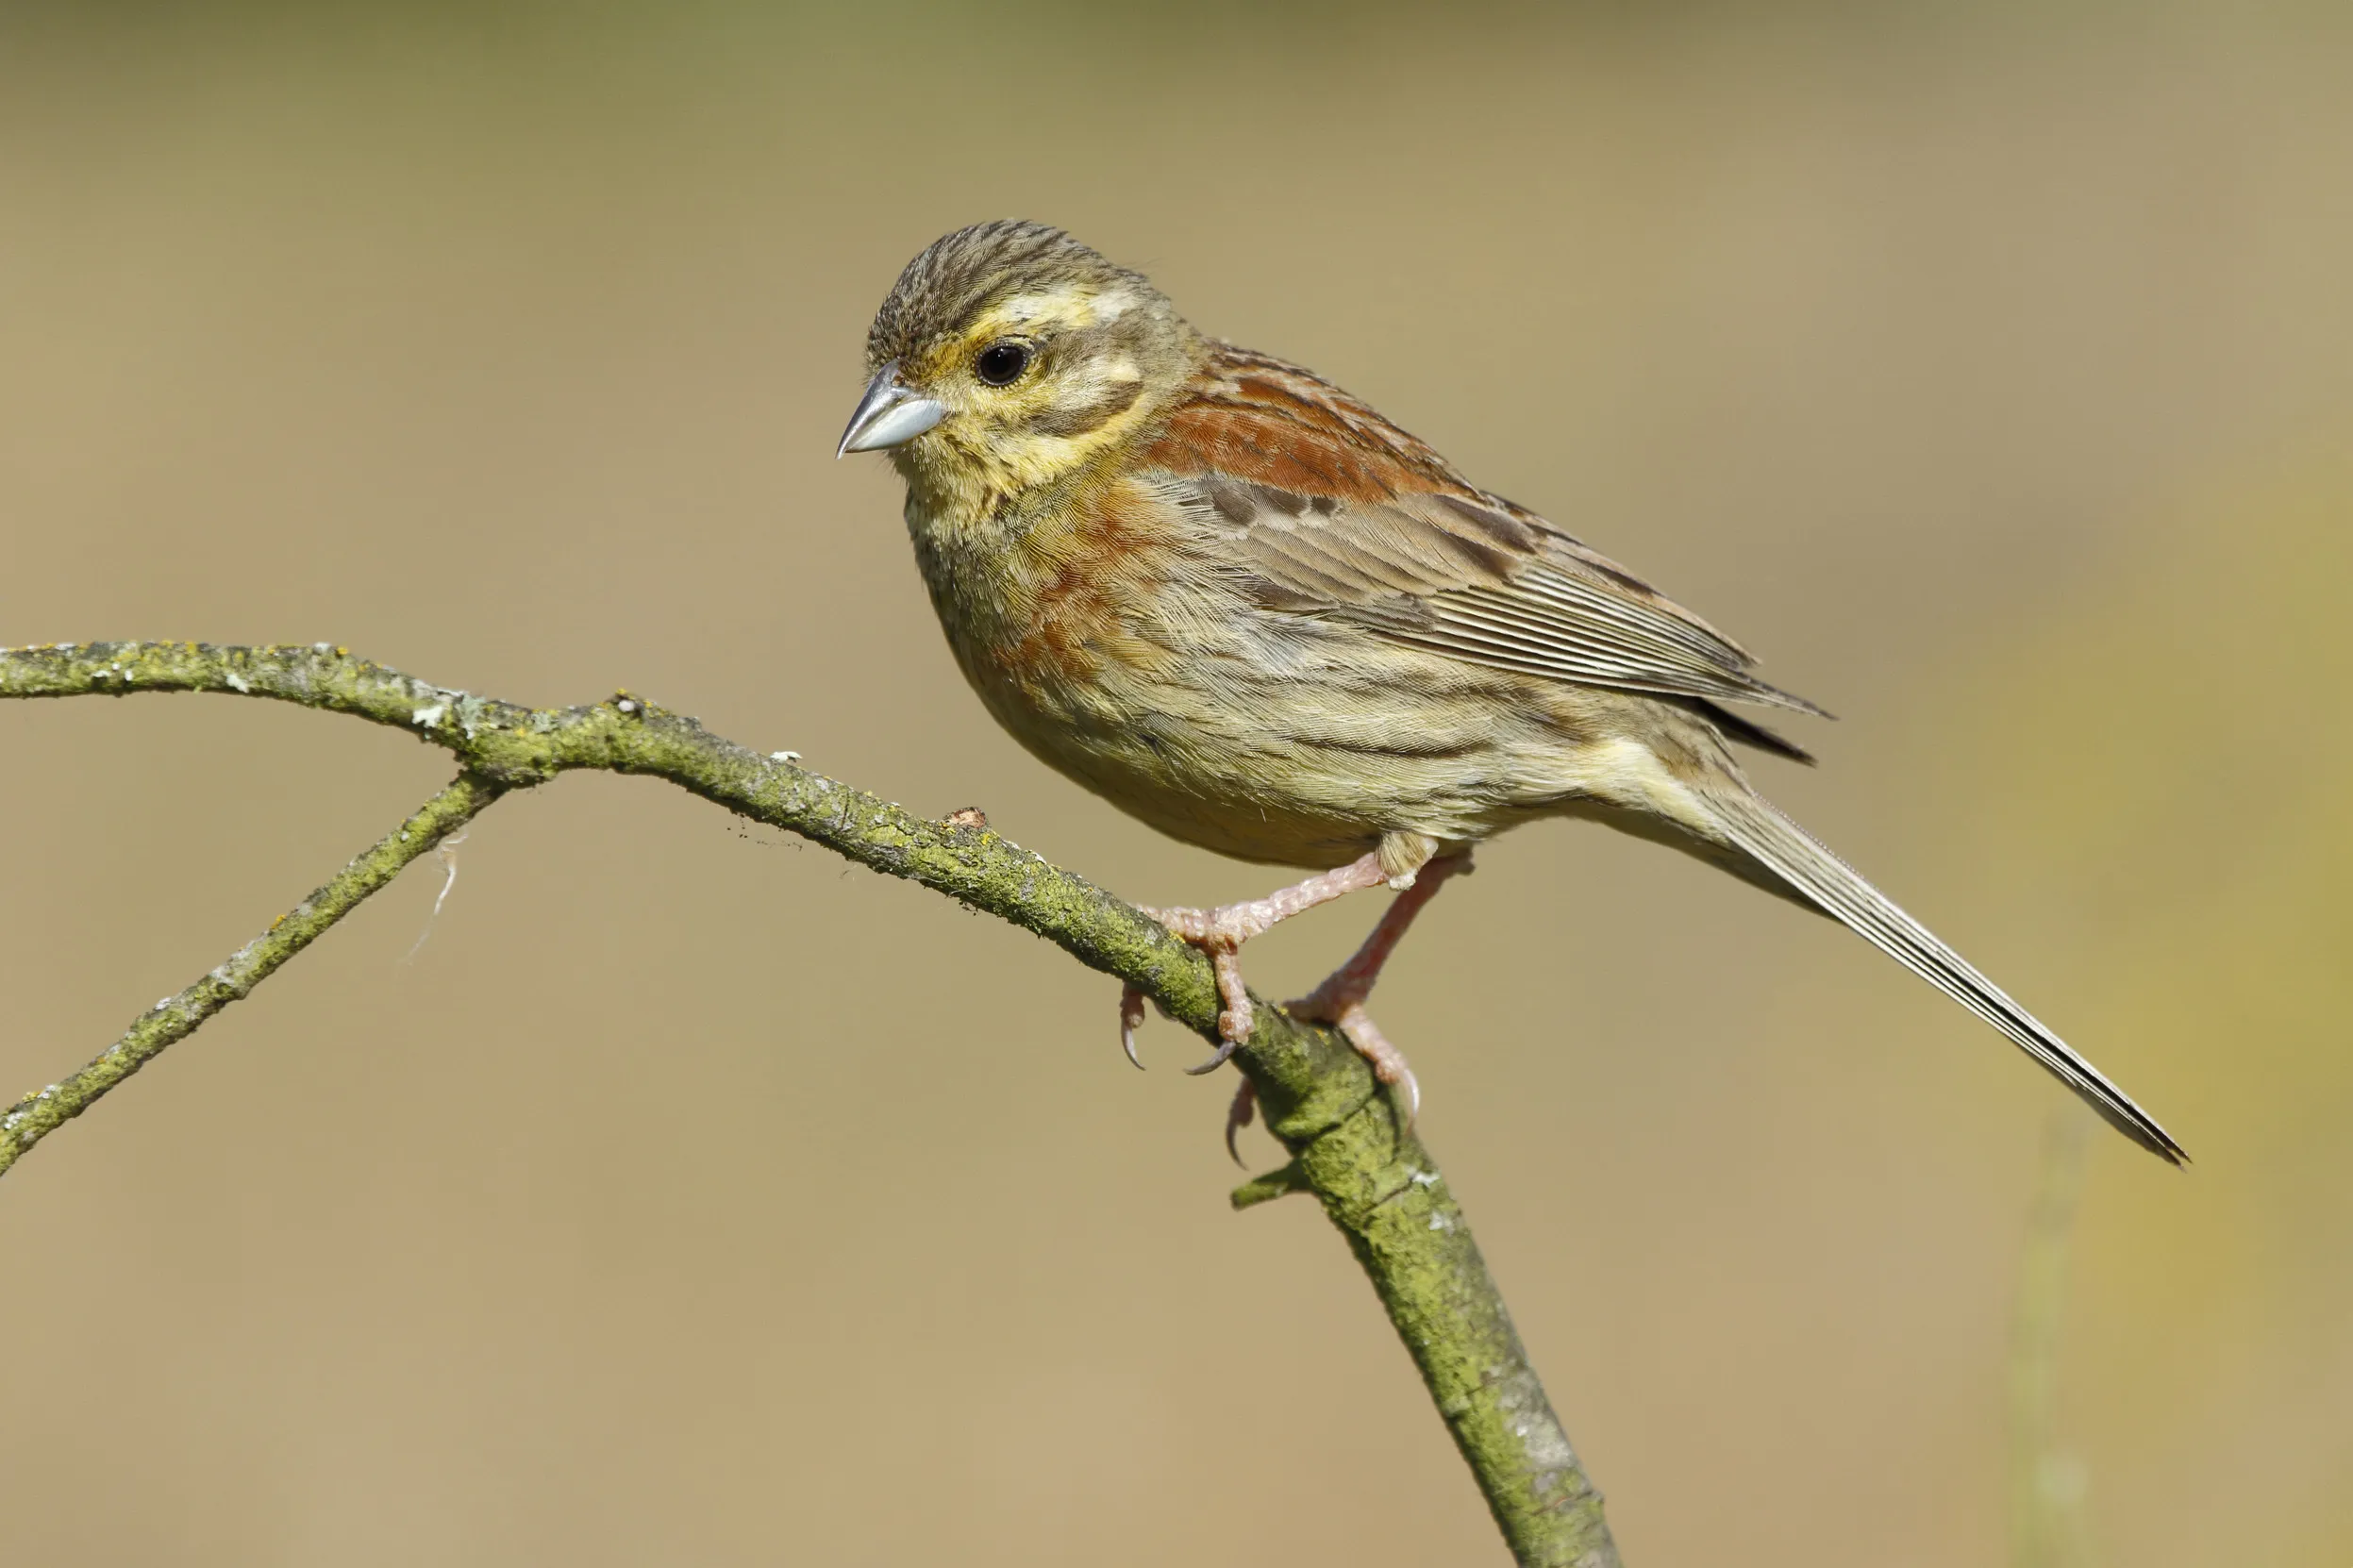 A female Cirl Bunting perched on a tree branch.